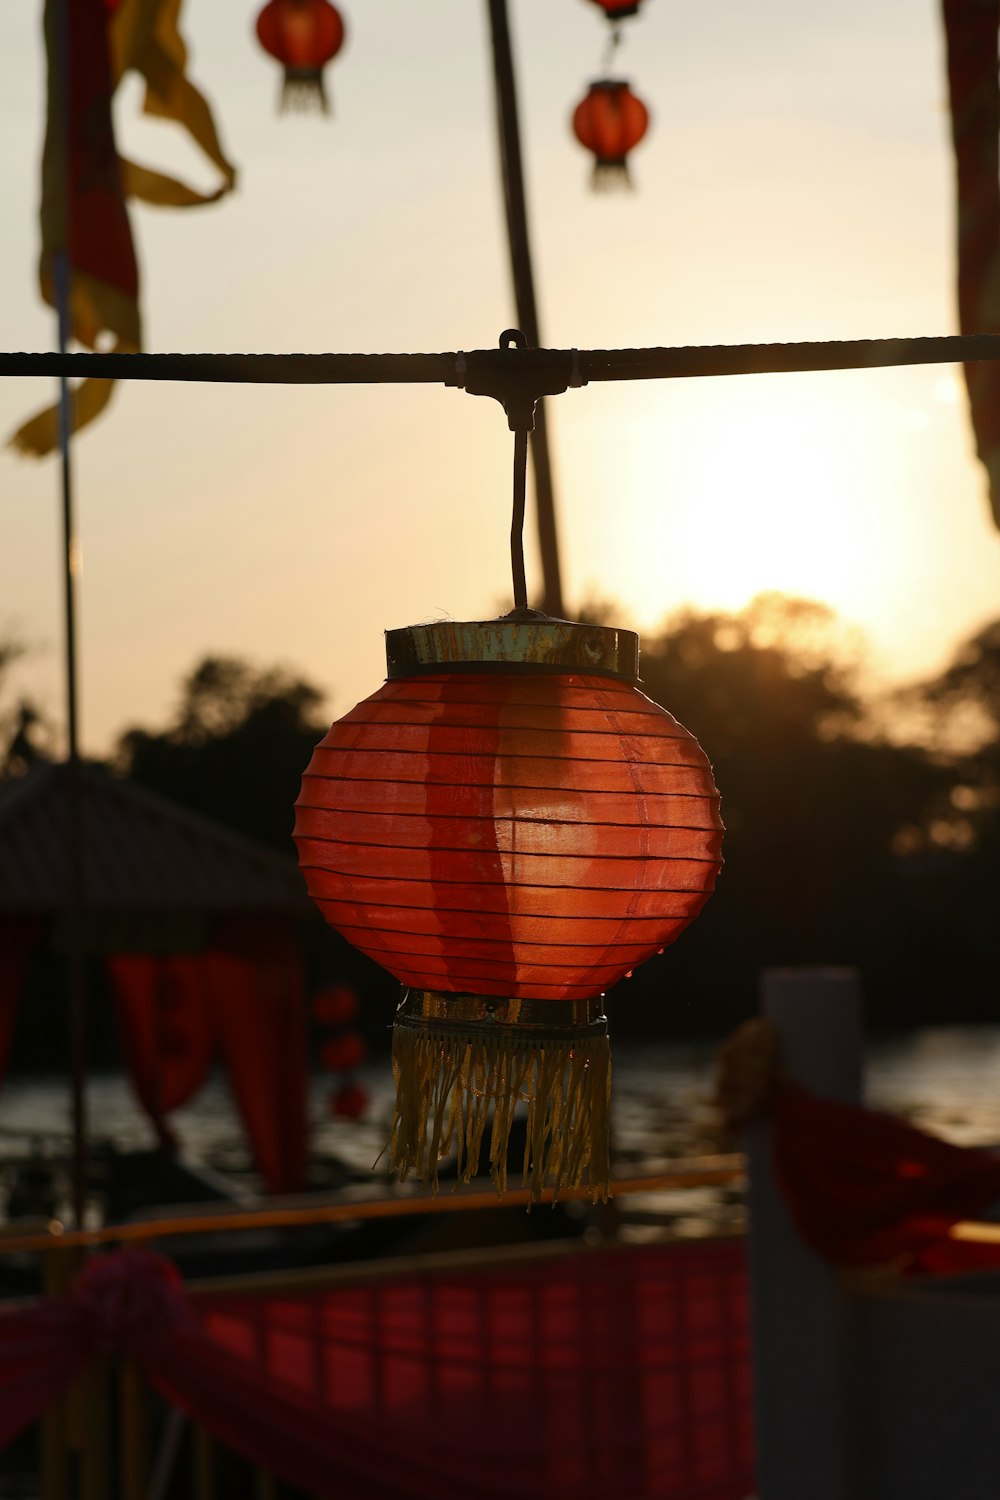 a red lantern hanging from a wire over a body of water